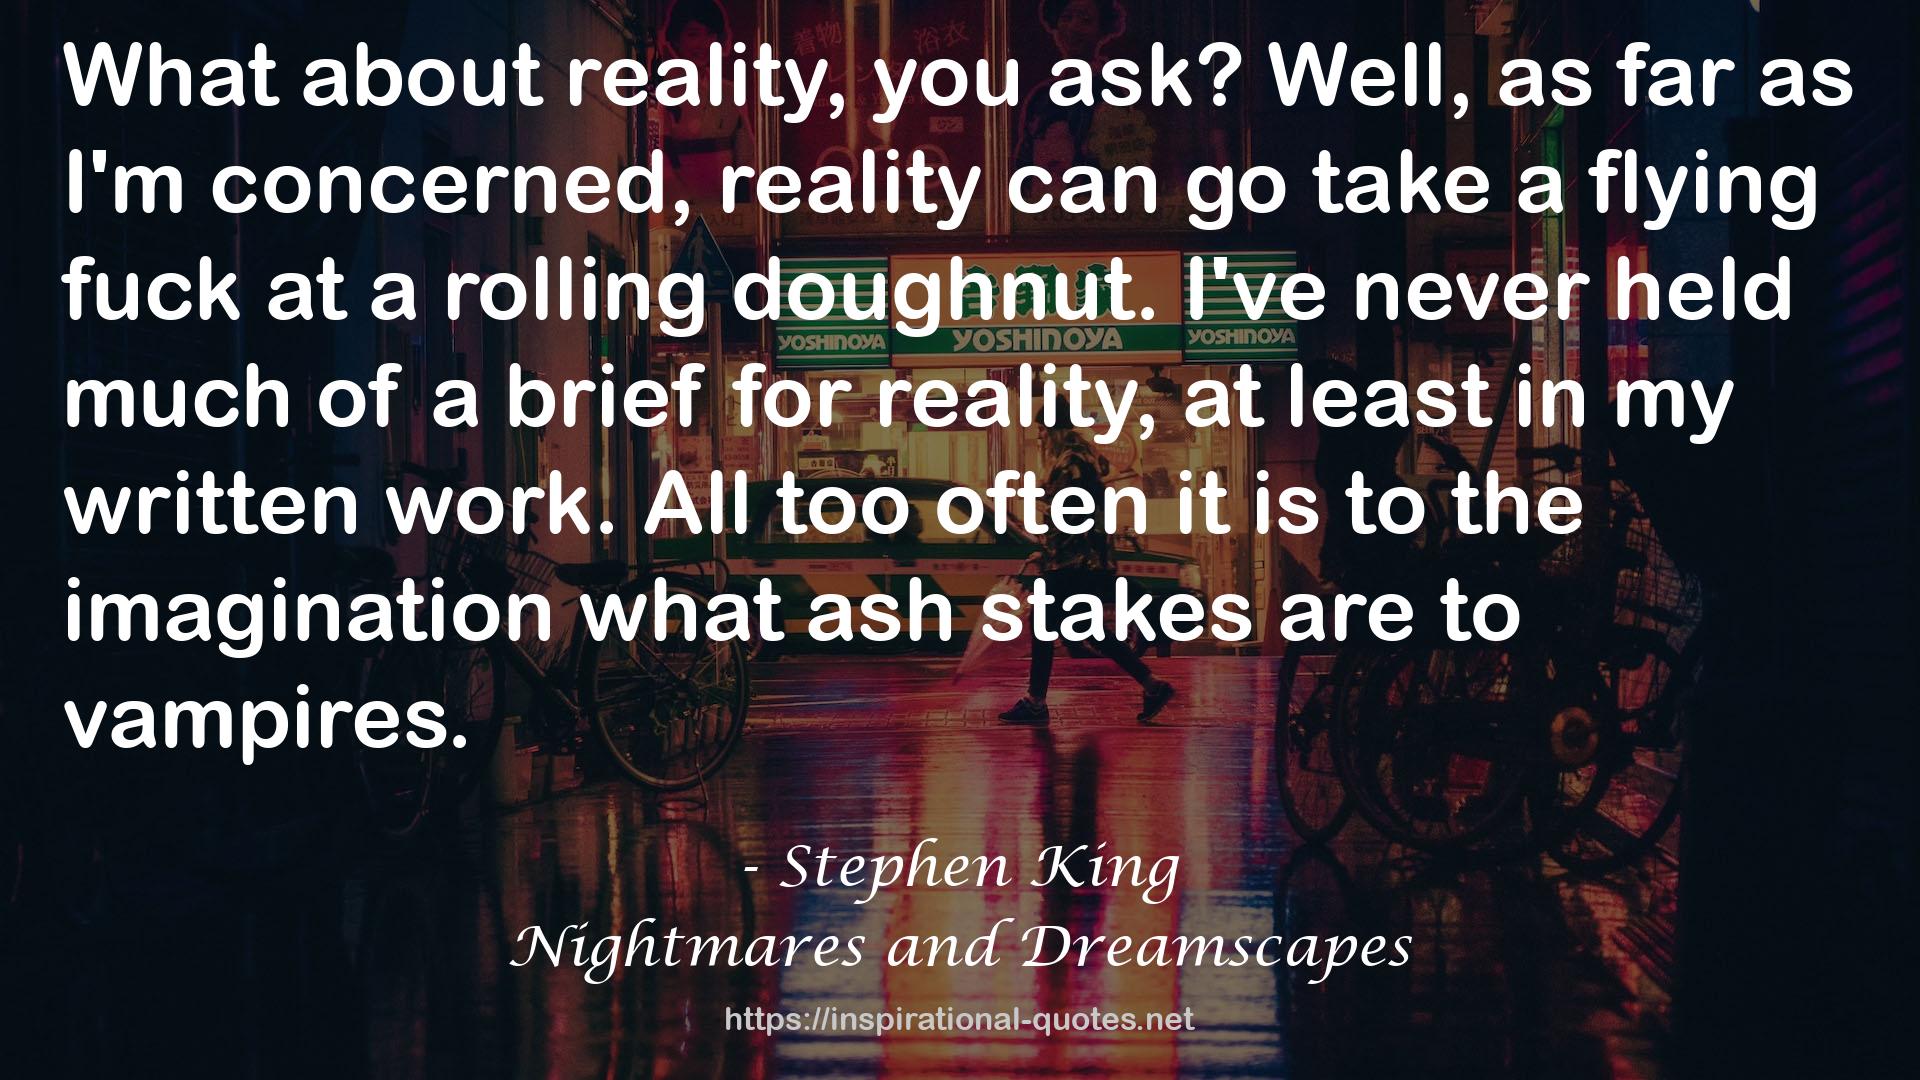 Nightmares and Dreamscapes QUOTES